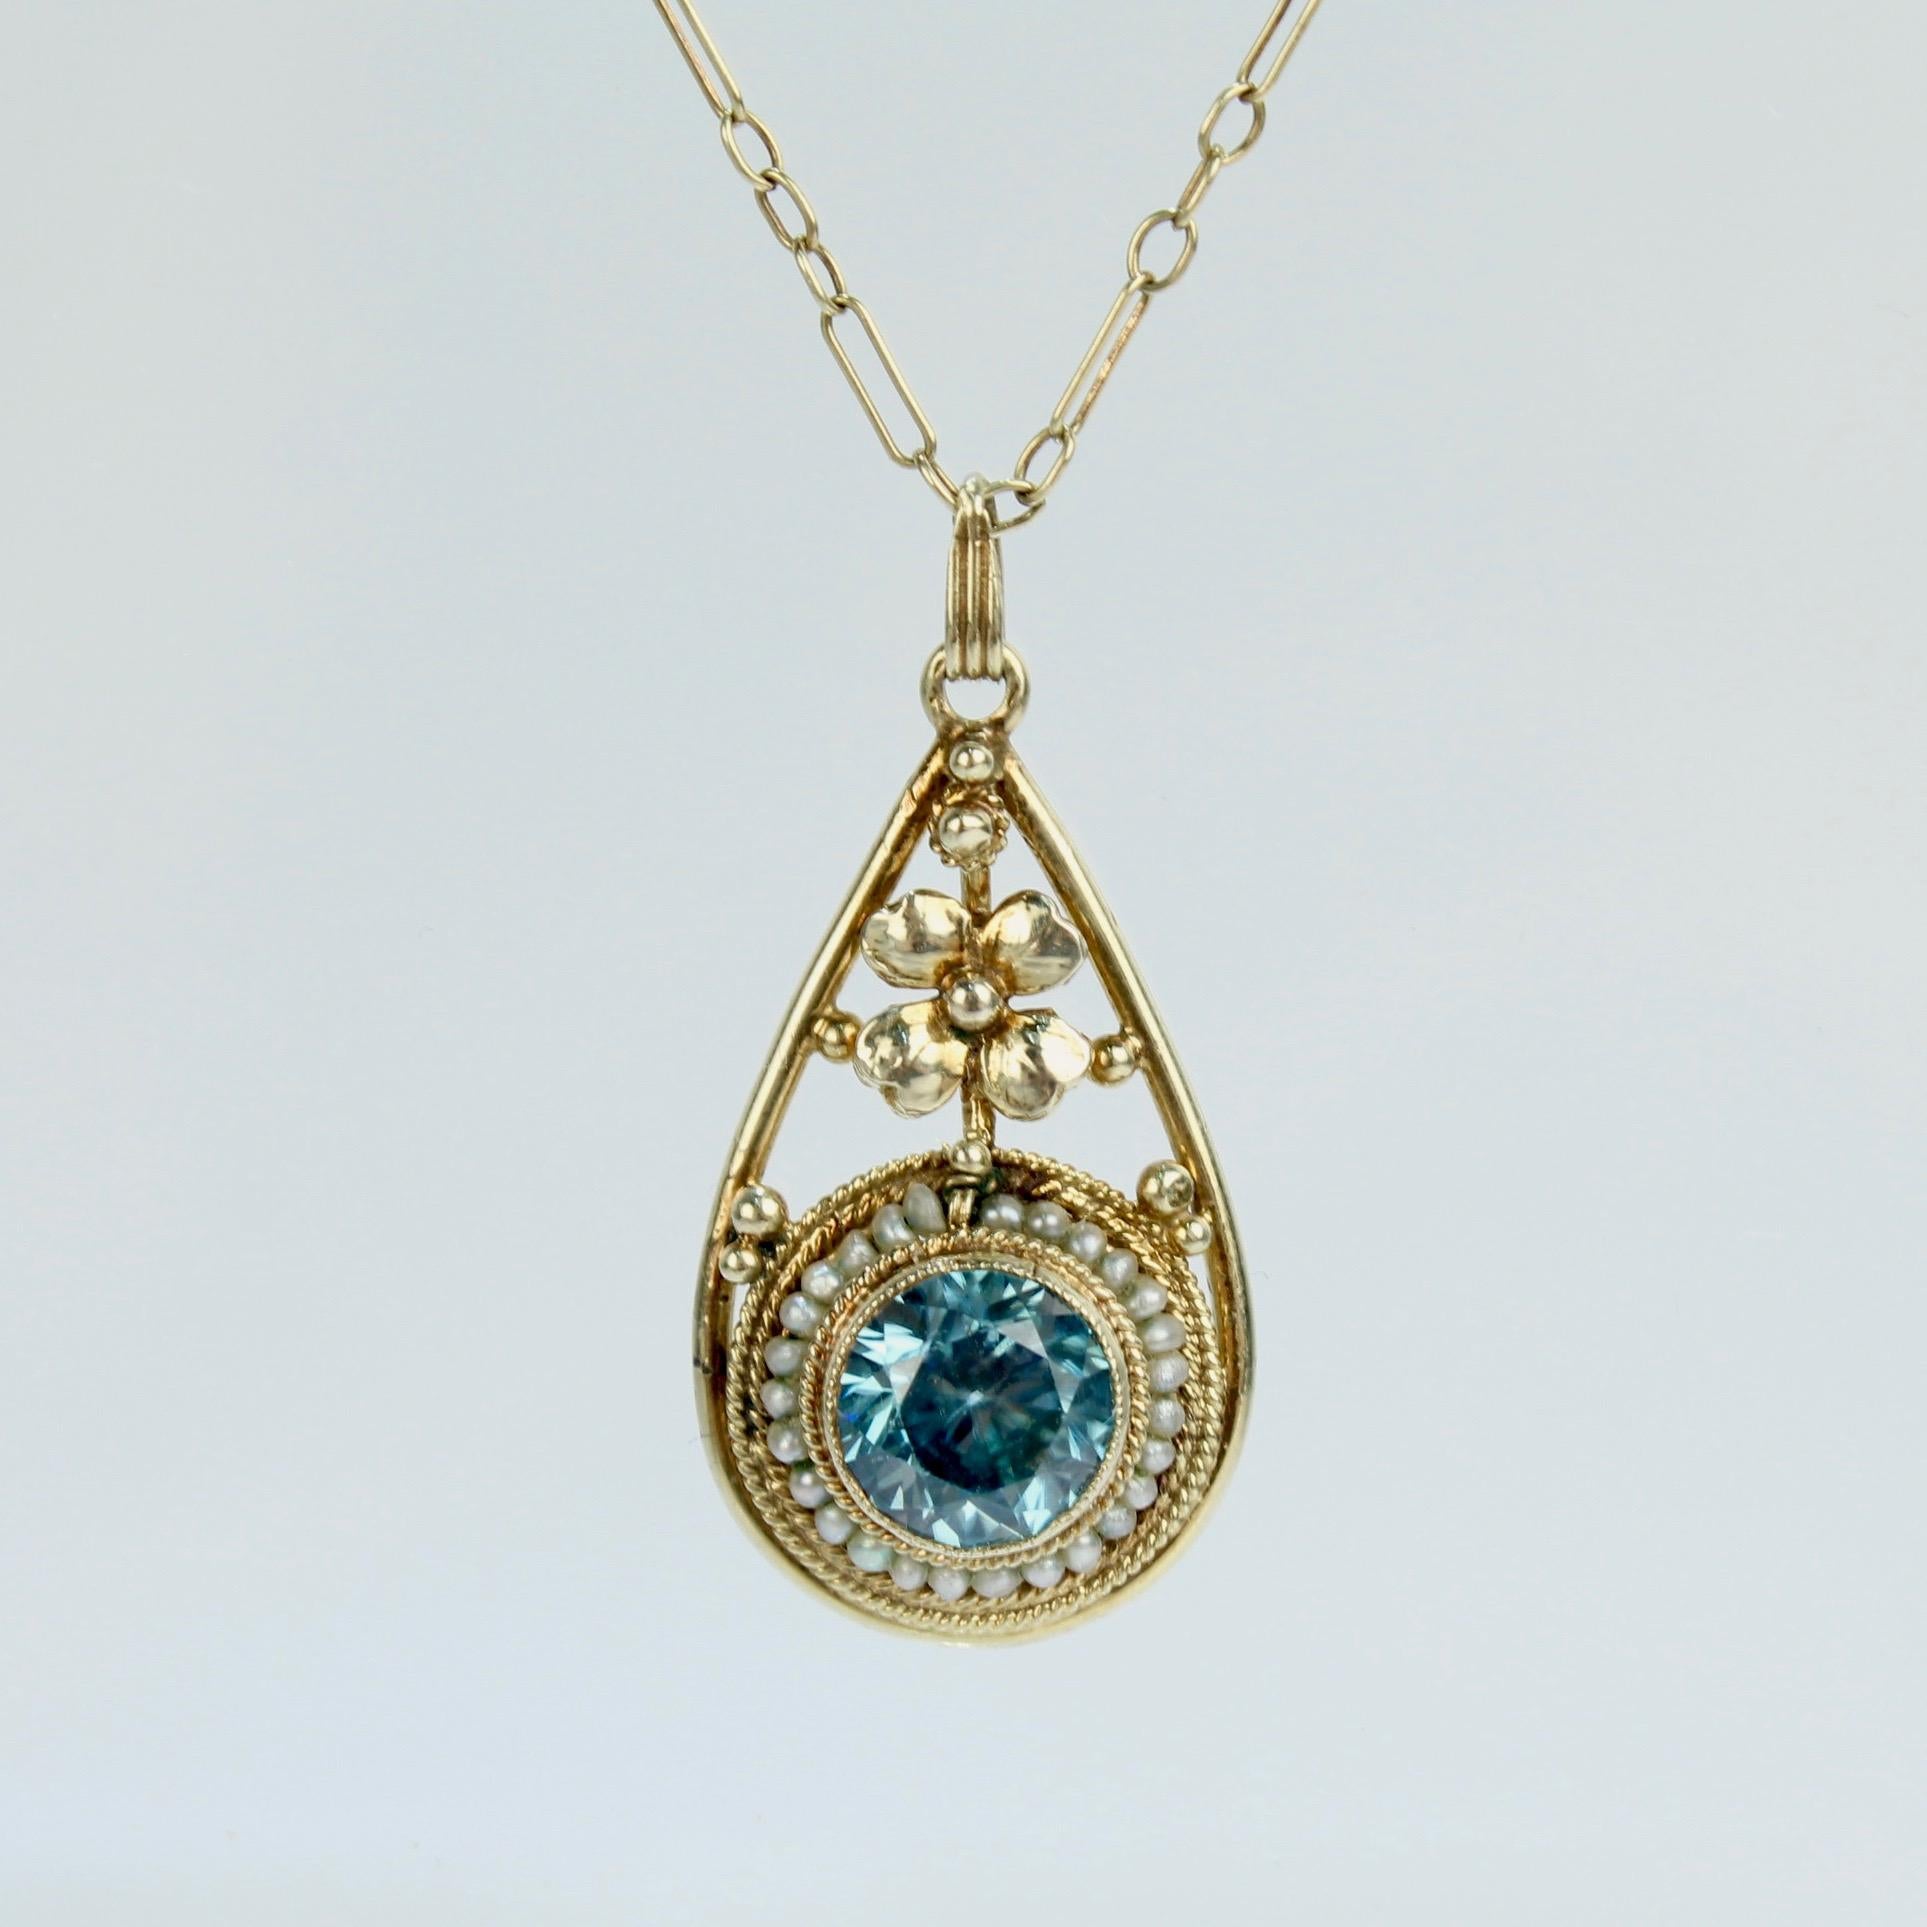 A fine gold, blue topaz & pearl teardrop necklace.

In 14k yellow gold with a 3 tiers of gold coils and seed pearls surrounding a bezel set blue topaz below a gold flower. 

Simply a wonderful necklace!

Date:
20th Century

Overall Condition:
It is